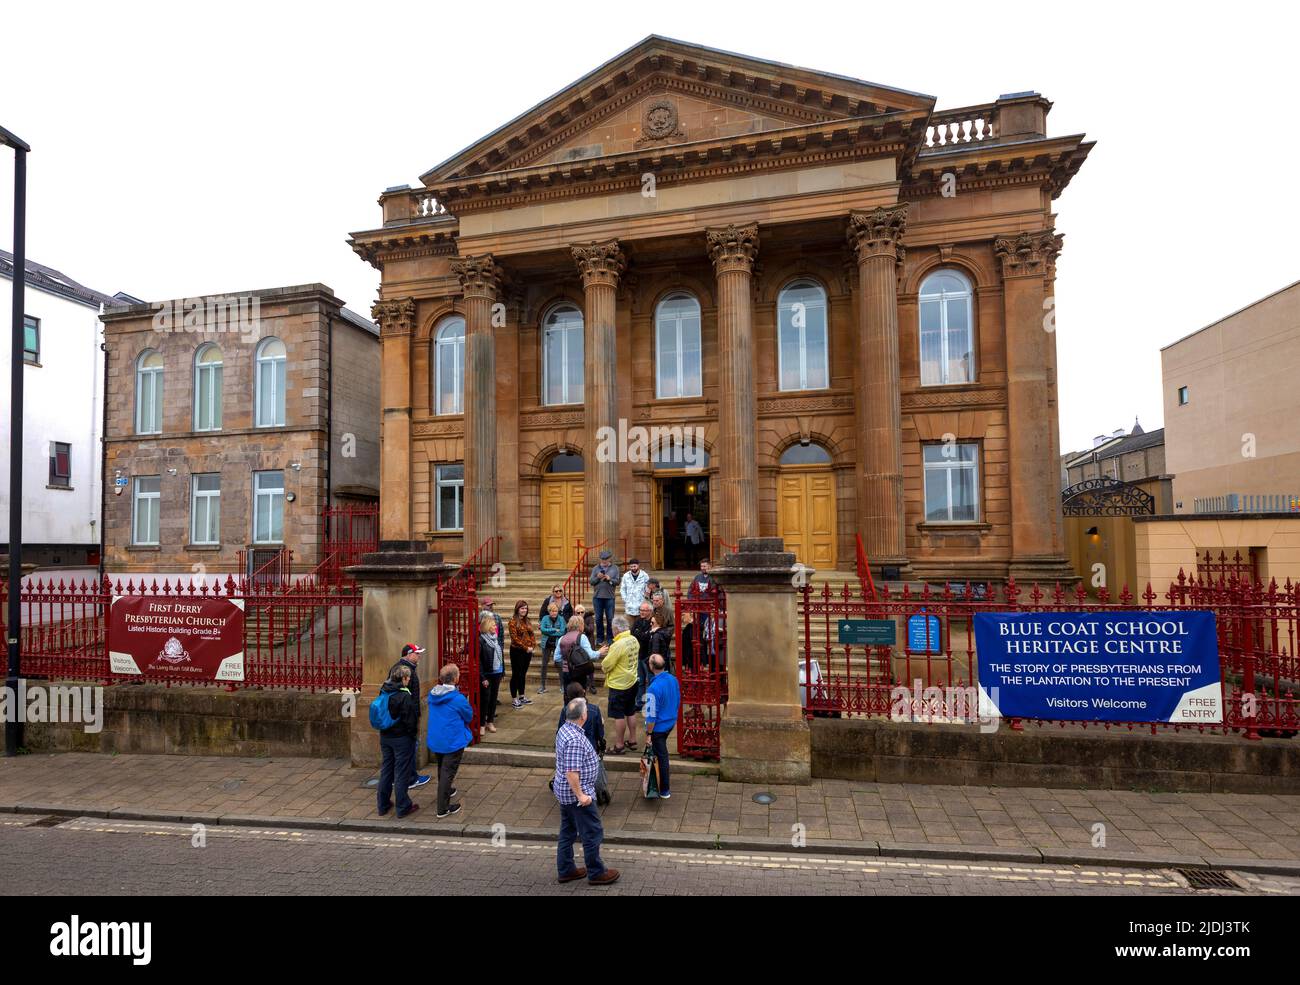 Tourists at First Derry Blue coat school heritage centre, Derry City, Northern Ireland Stock Photo